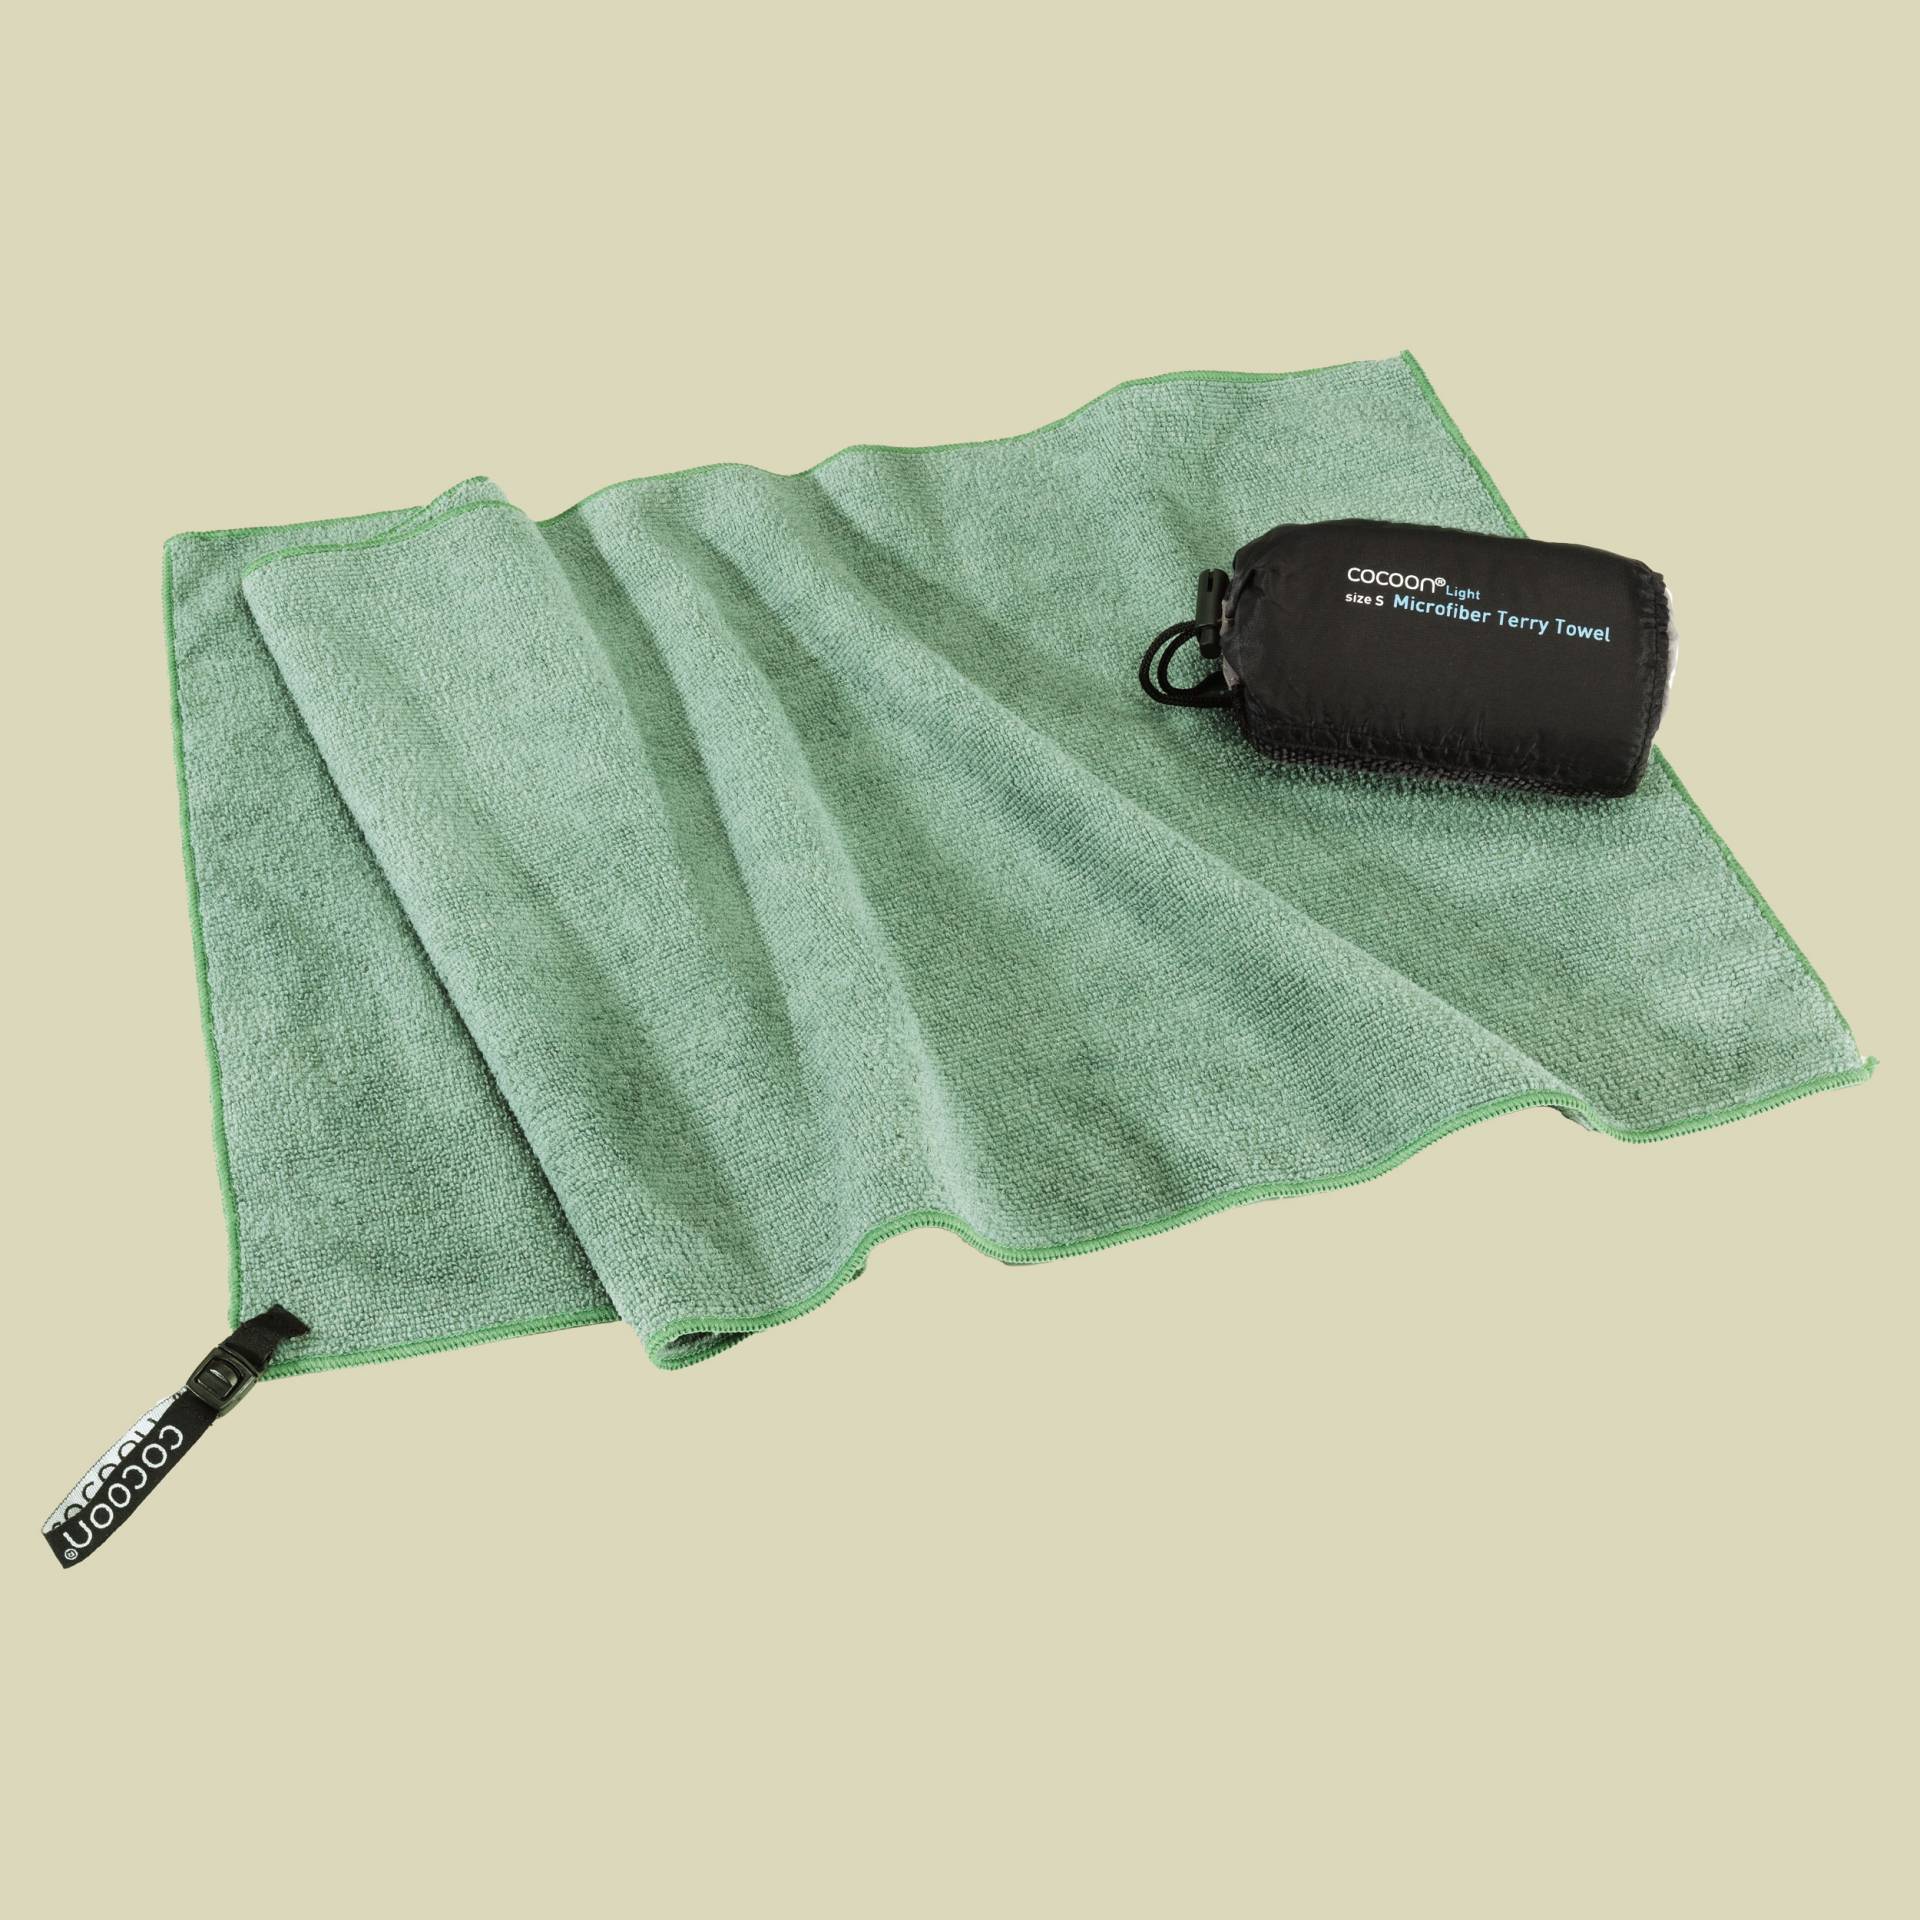 Terry Towel Light Größe small Farbe bamboo green von Cocoon